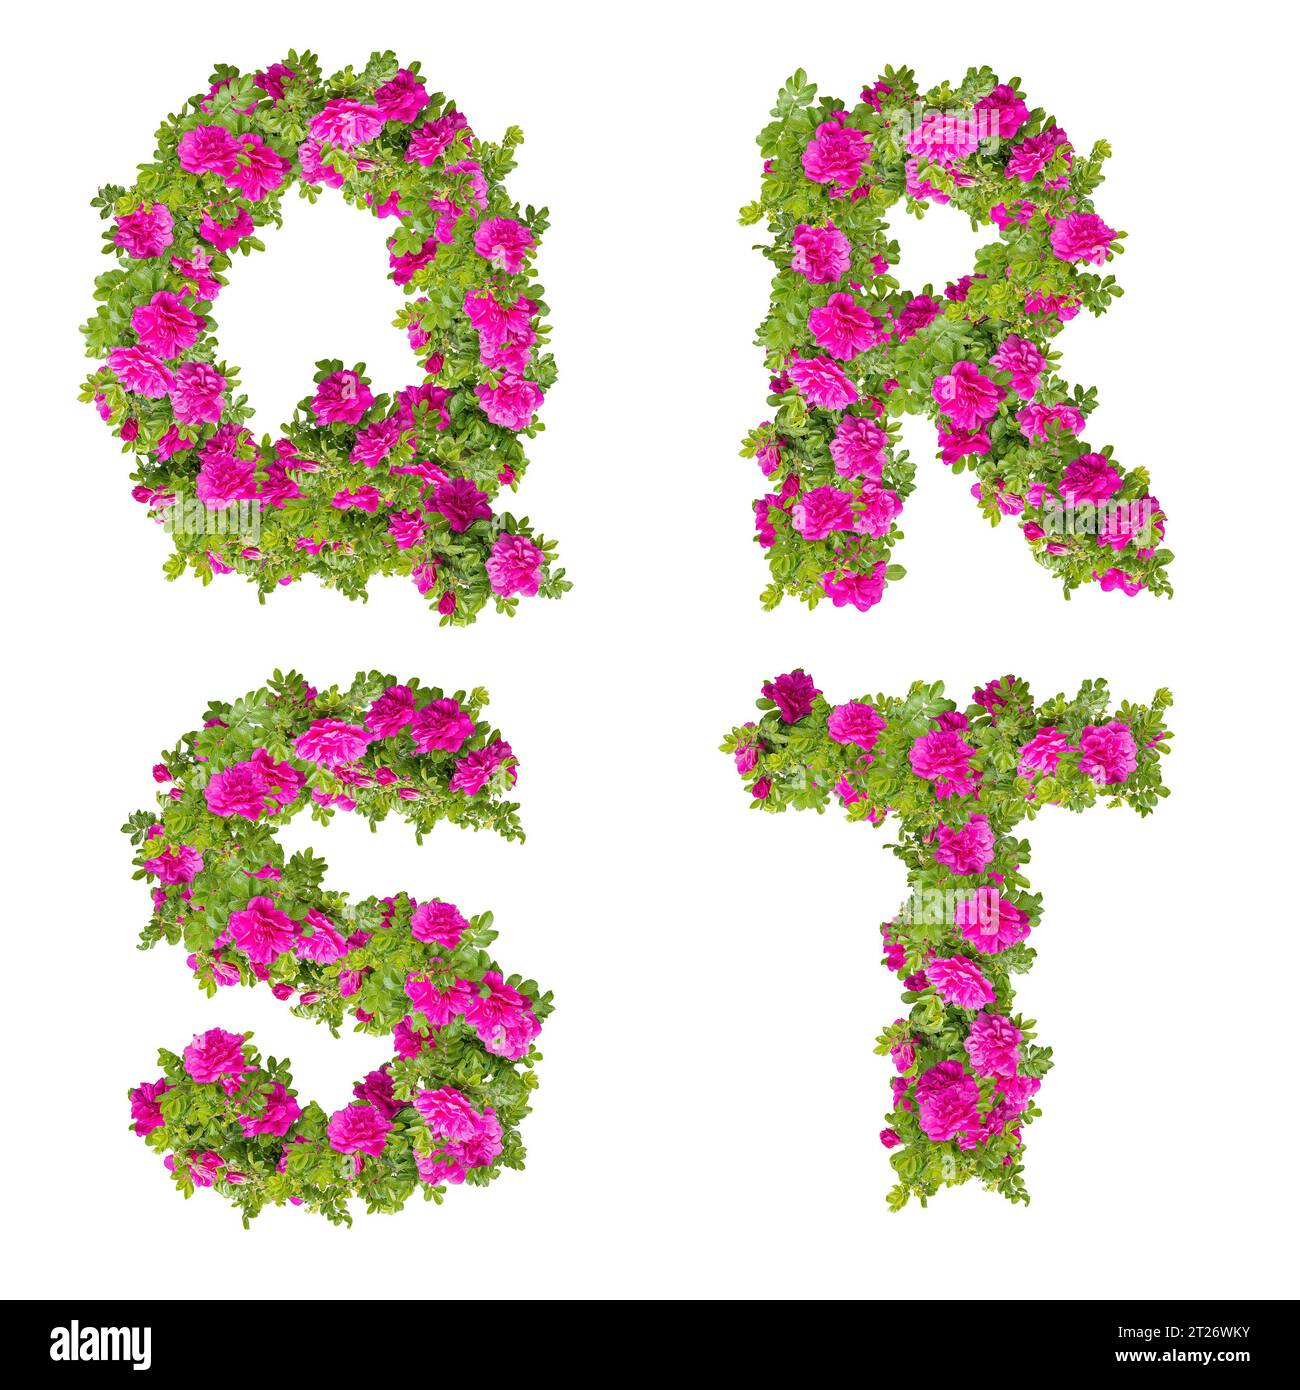 3D illustration of pink wild rose flowers alphabet - letters Q-T Stock Photo